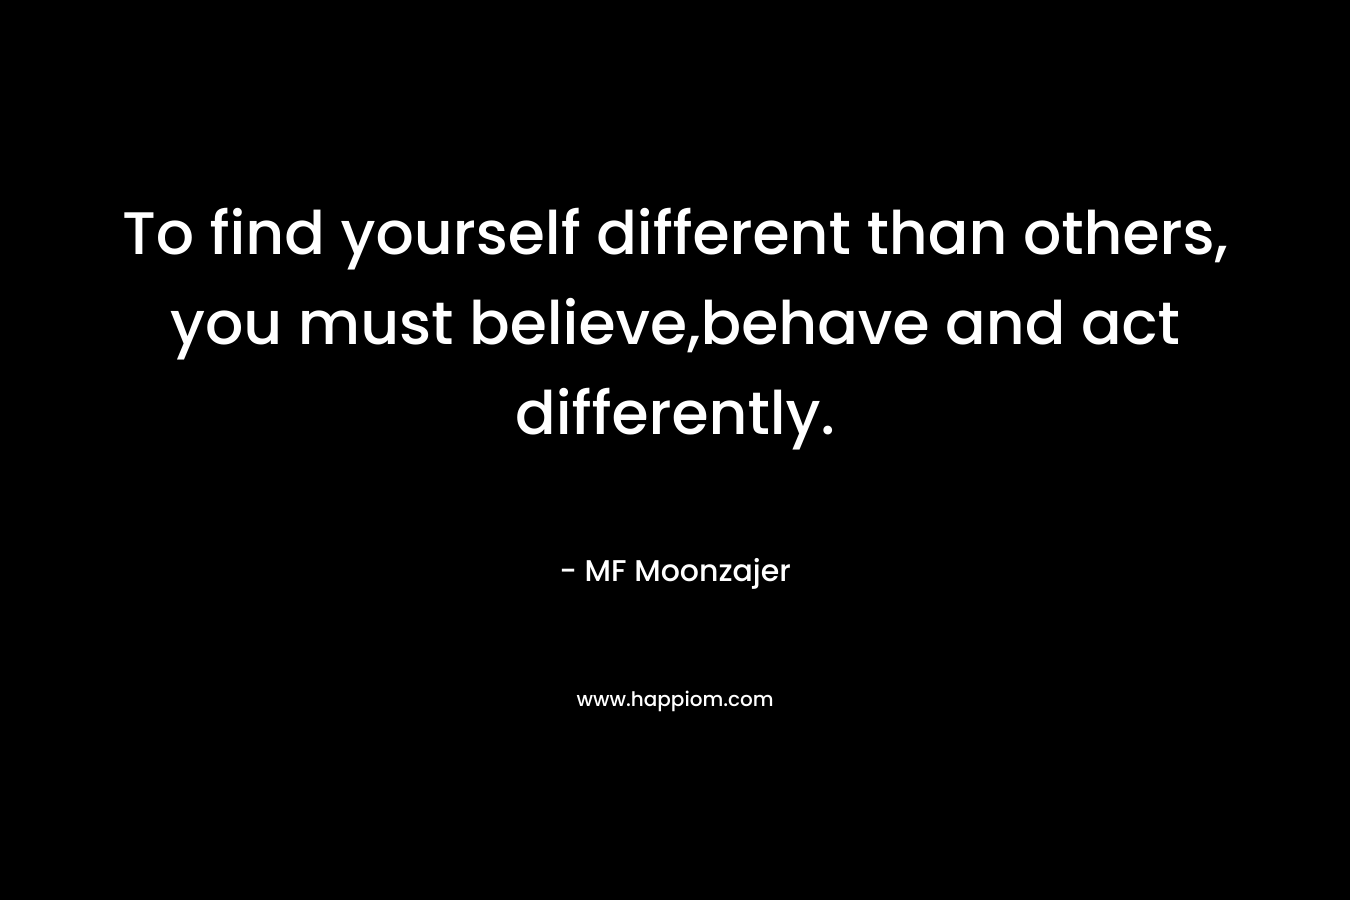 To find yourself different than others, you must believe,behave and act differently. – MF Moonzajer